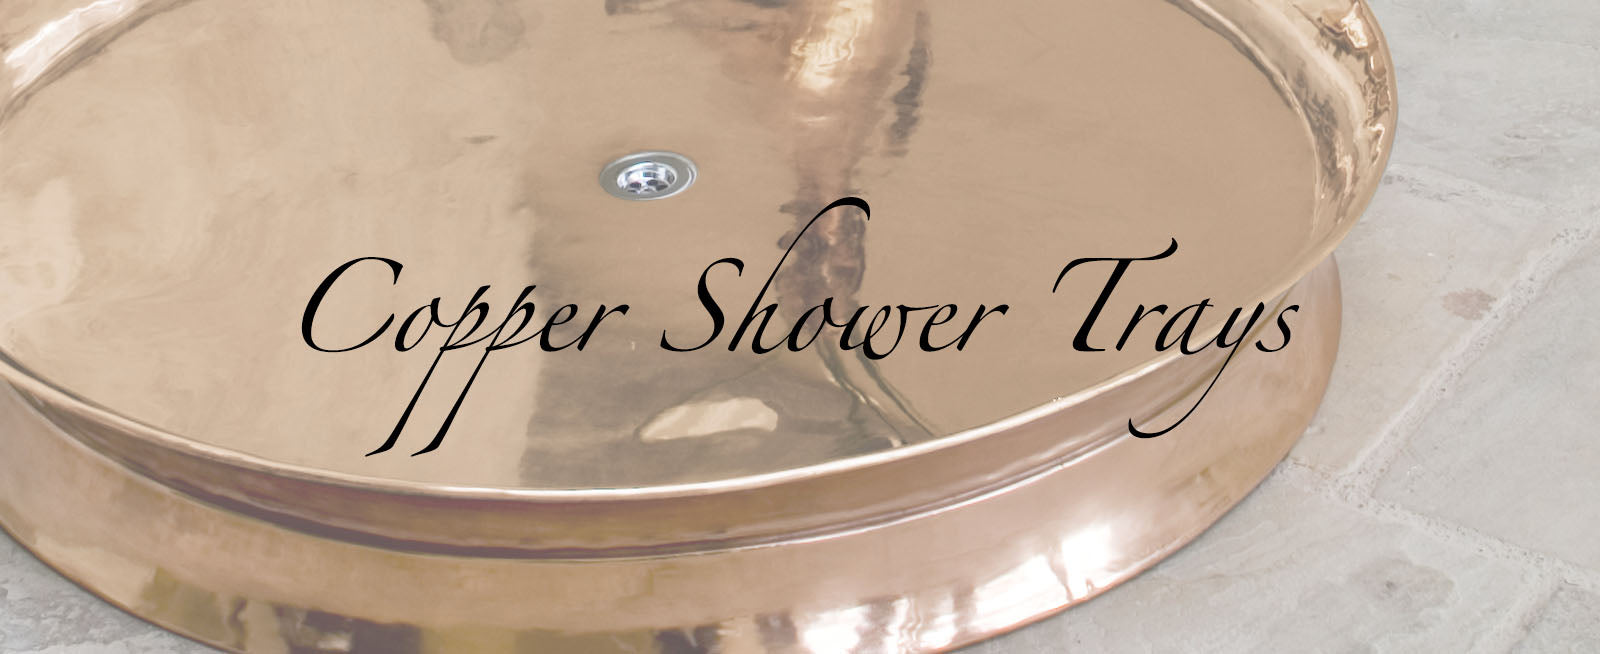 Copper Shower Trays